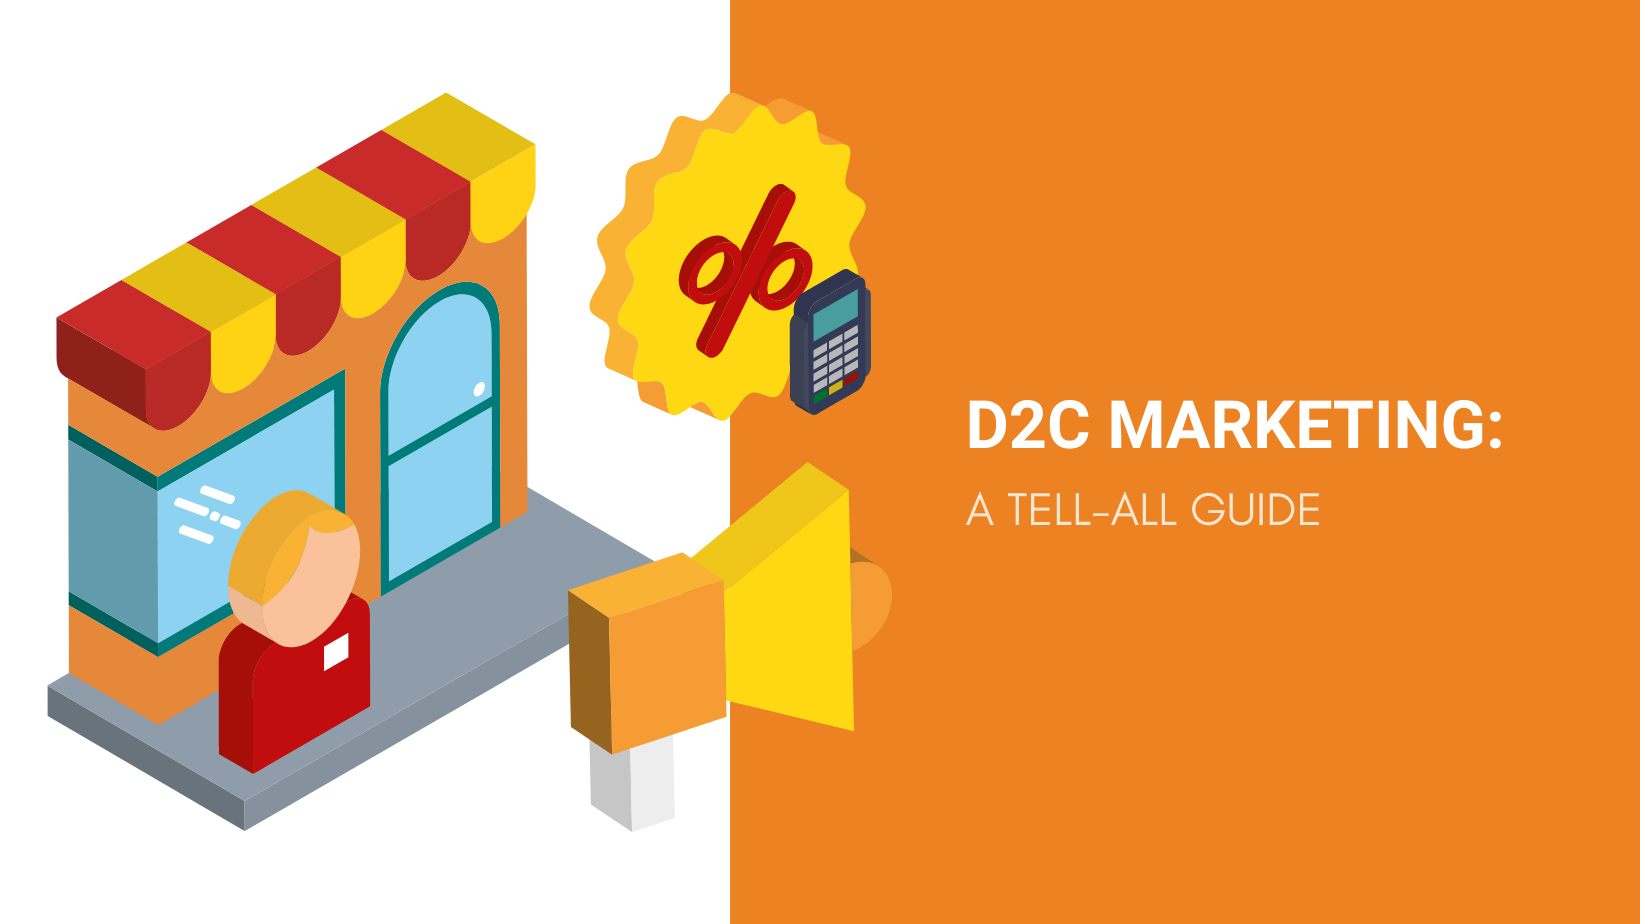 D2C MARKETING A TELL-ALL GUIDE